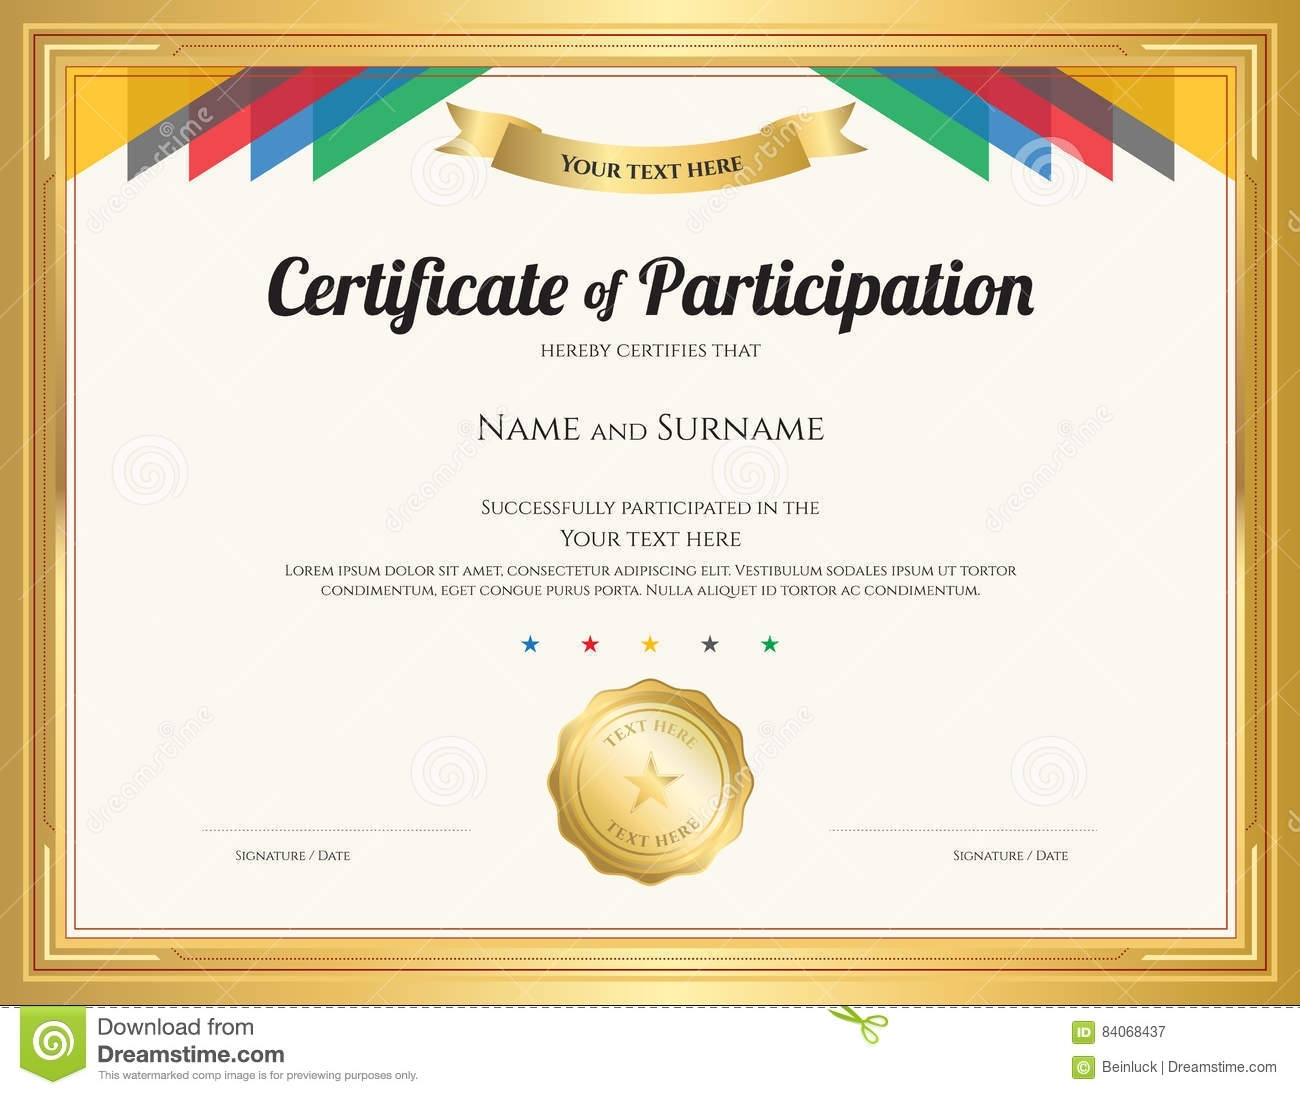 Participation Certificate Templates Free Download Pertaining To Participation Certificate Templates Free Download